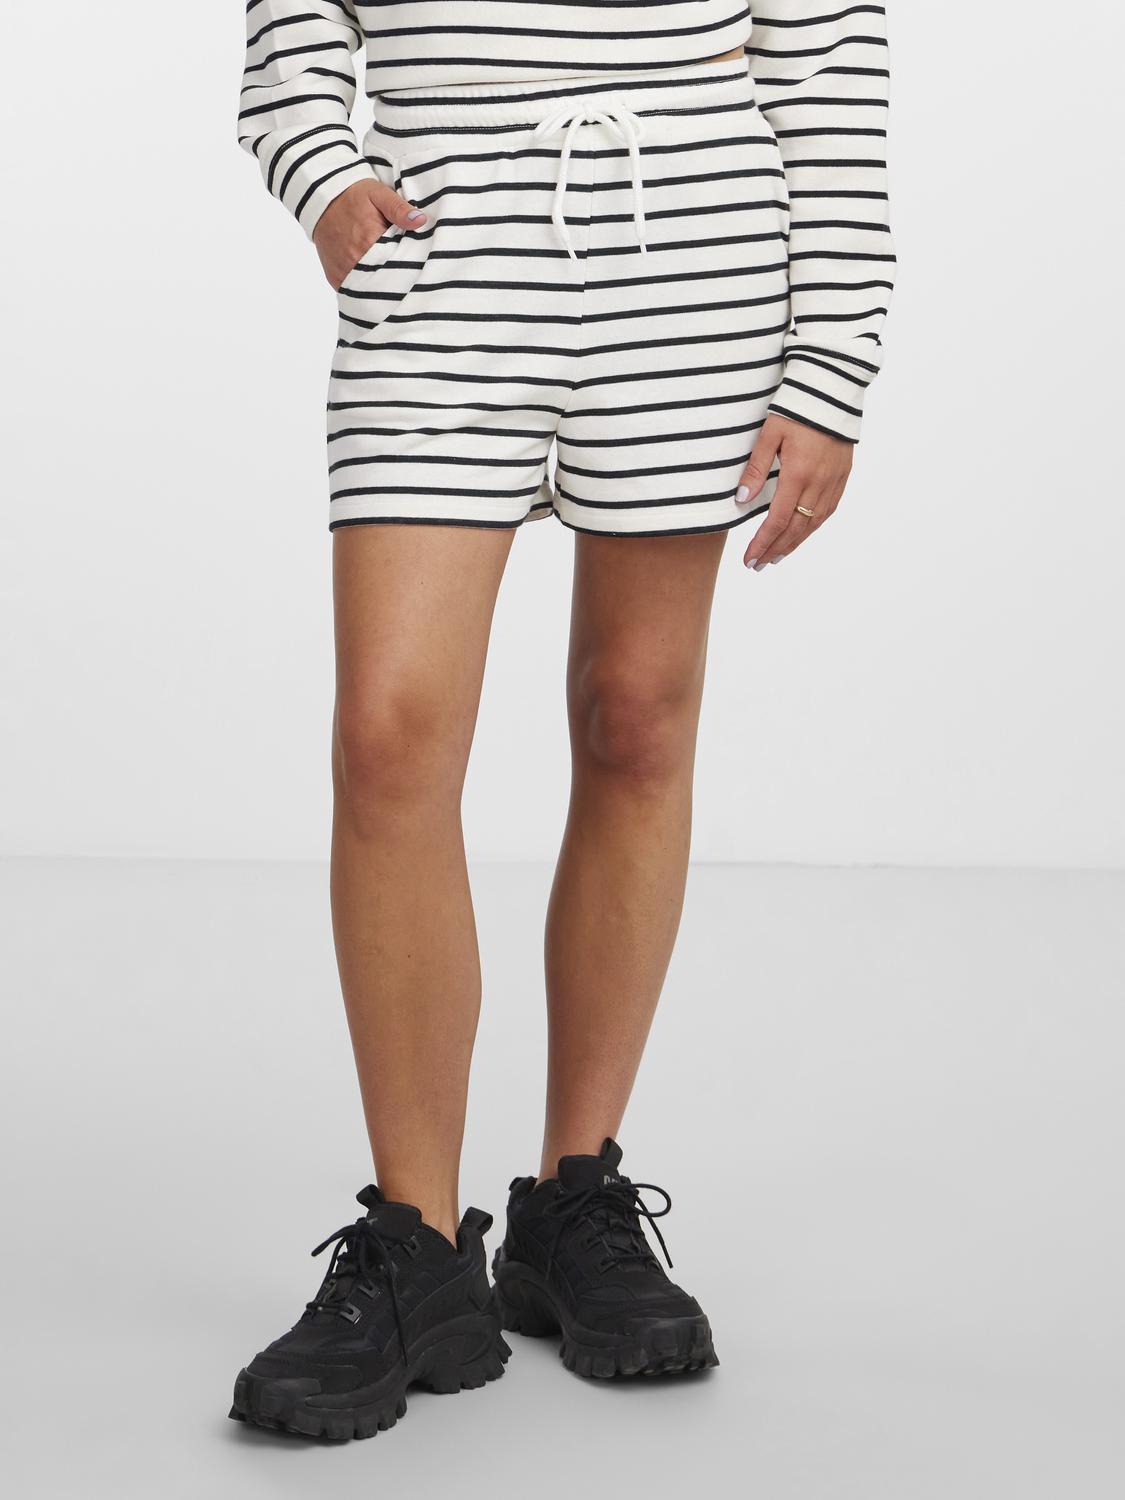 Pieces Striped Sweat Shorts in Black